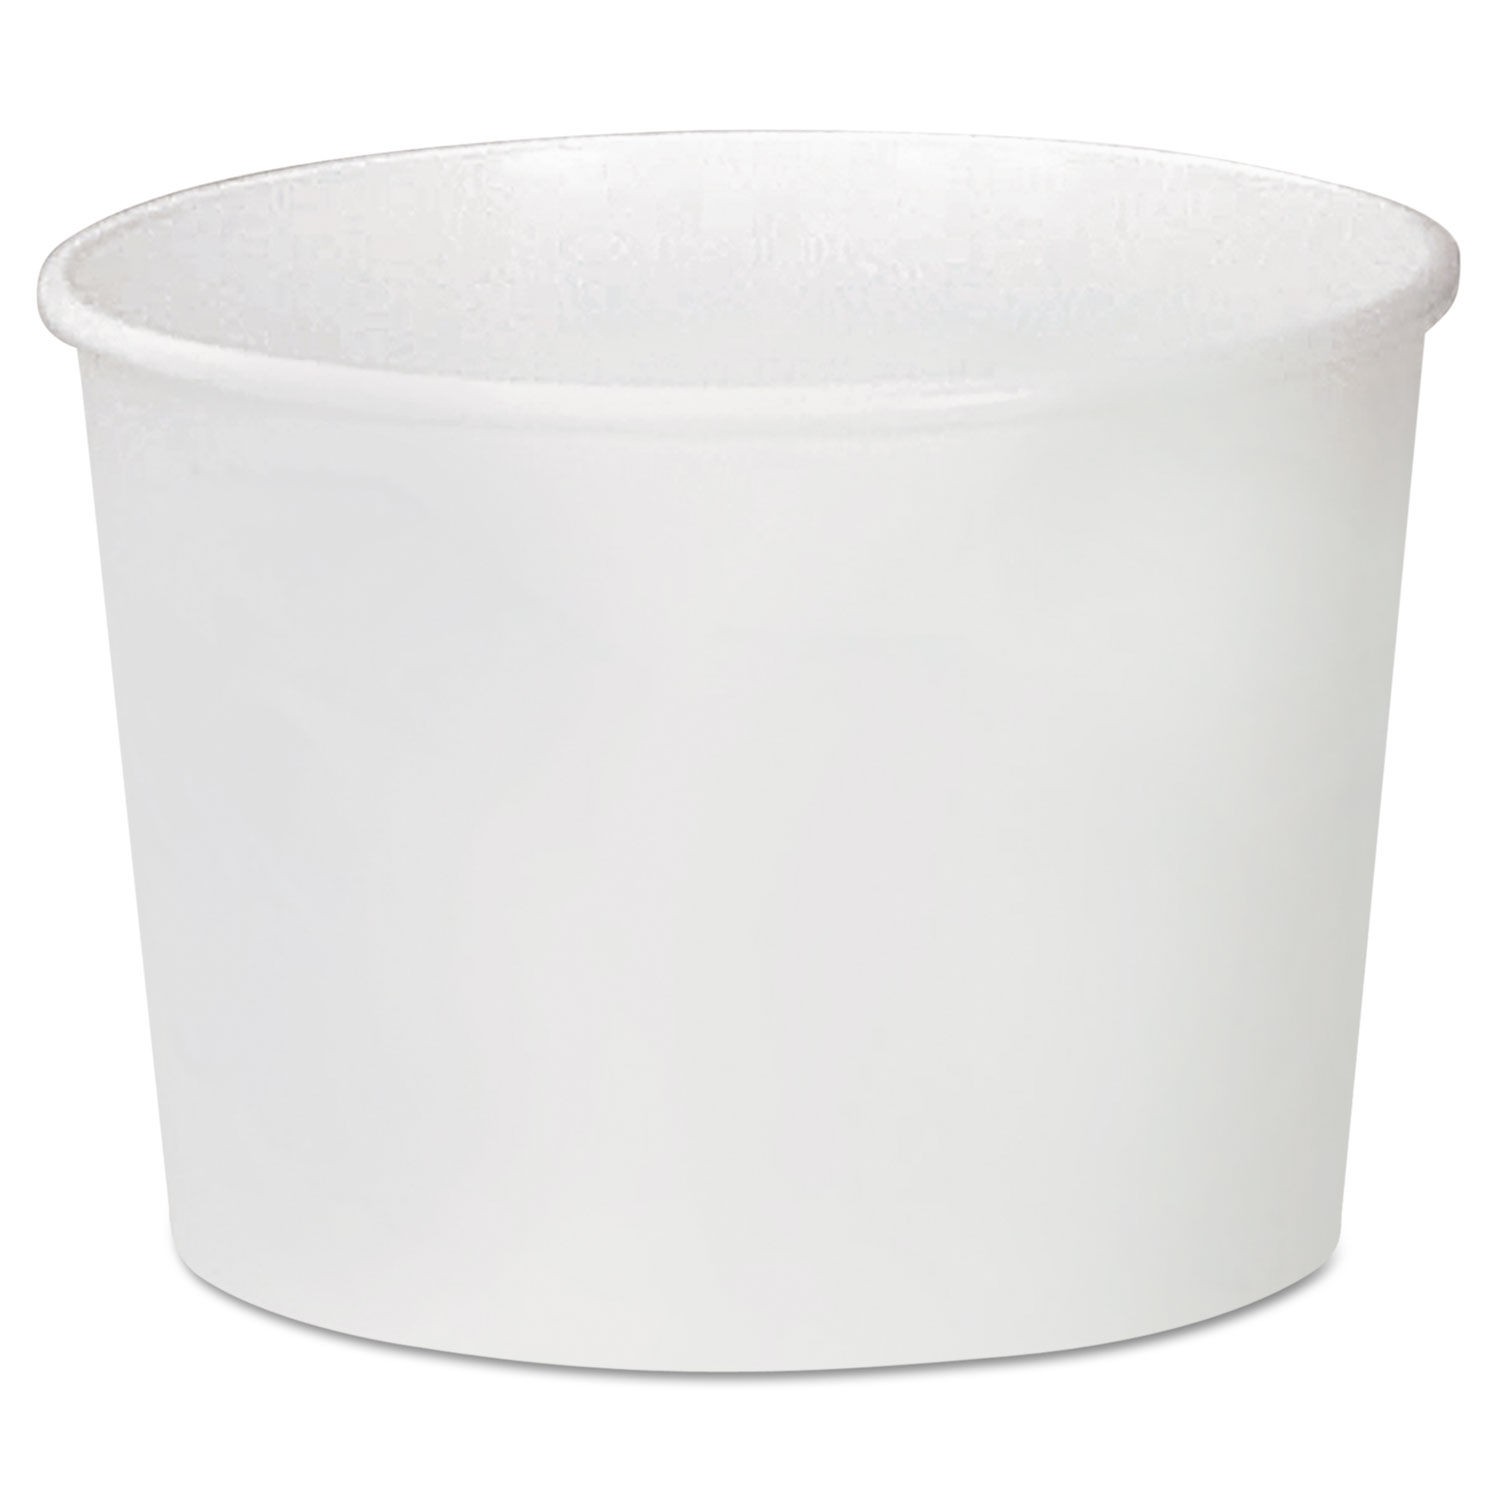 Double Poly Paper Food Container, Squat, White, 16 oz, 500/Carton